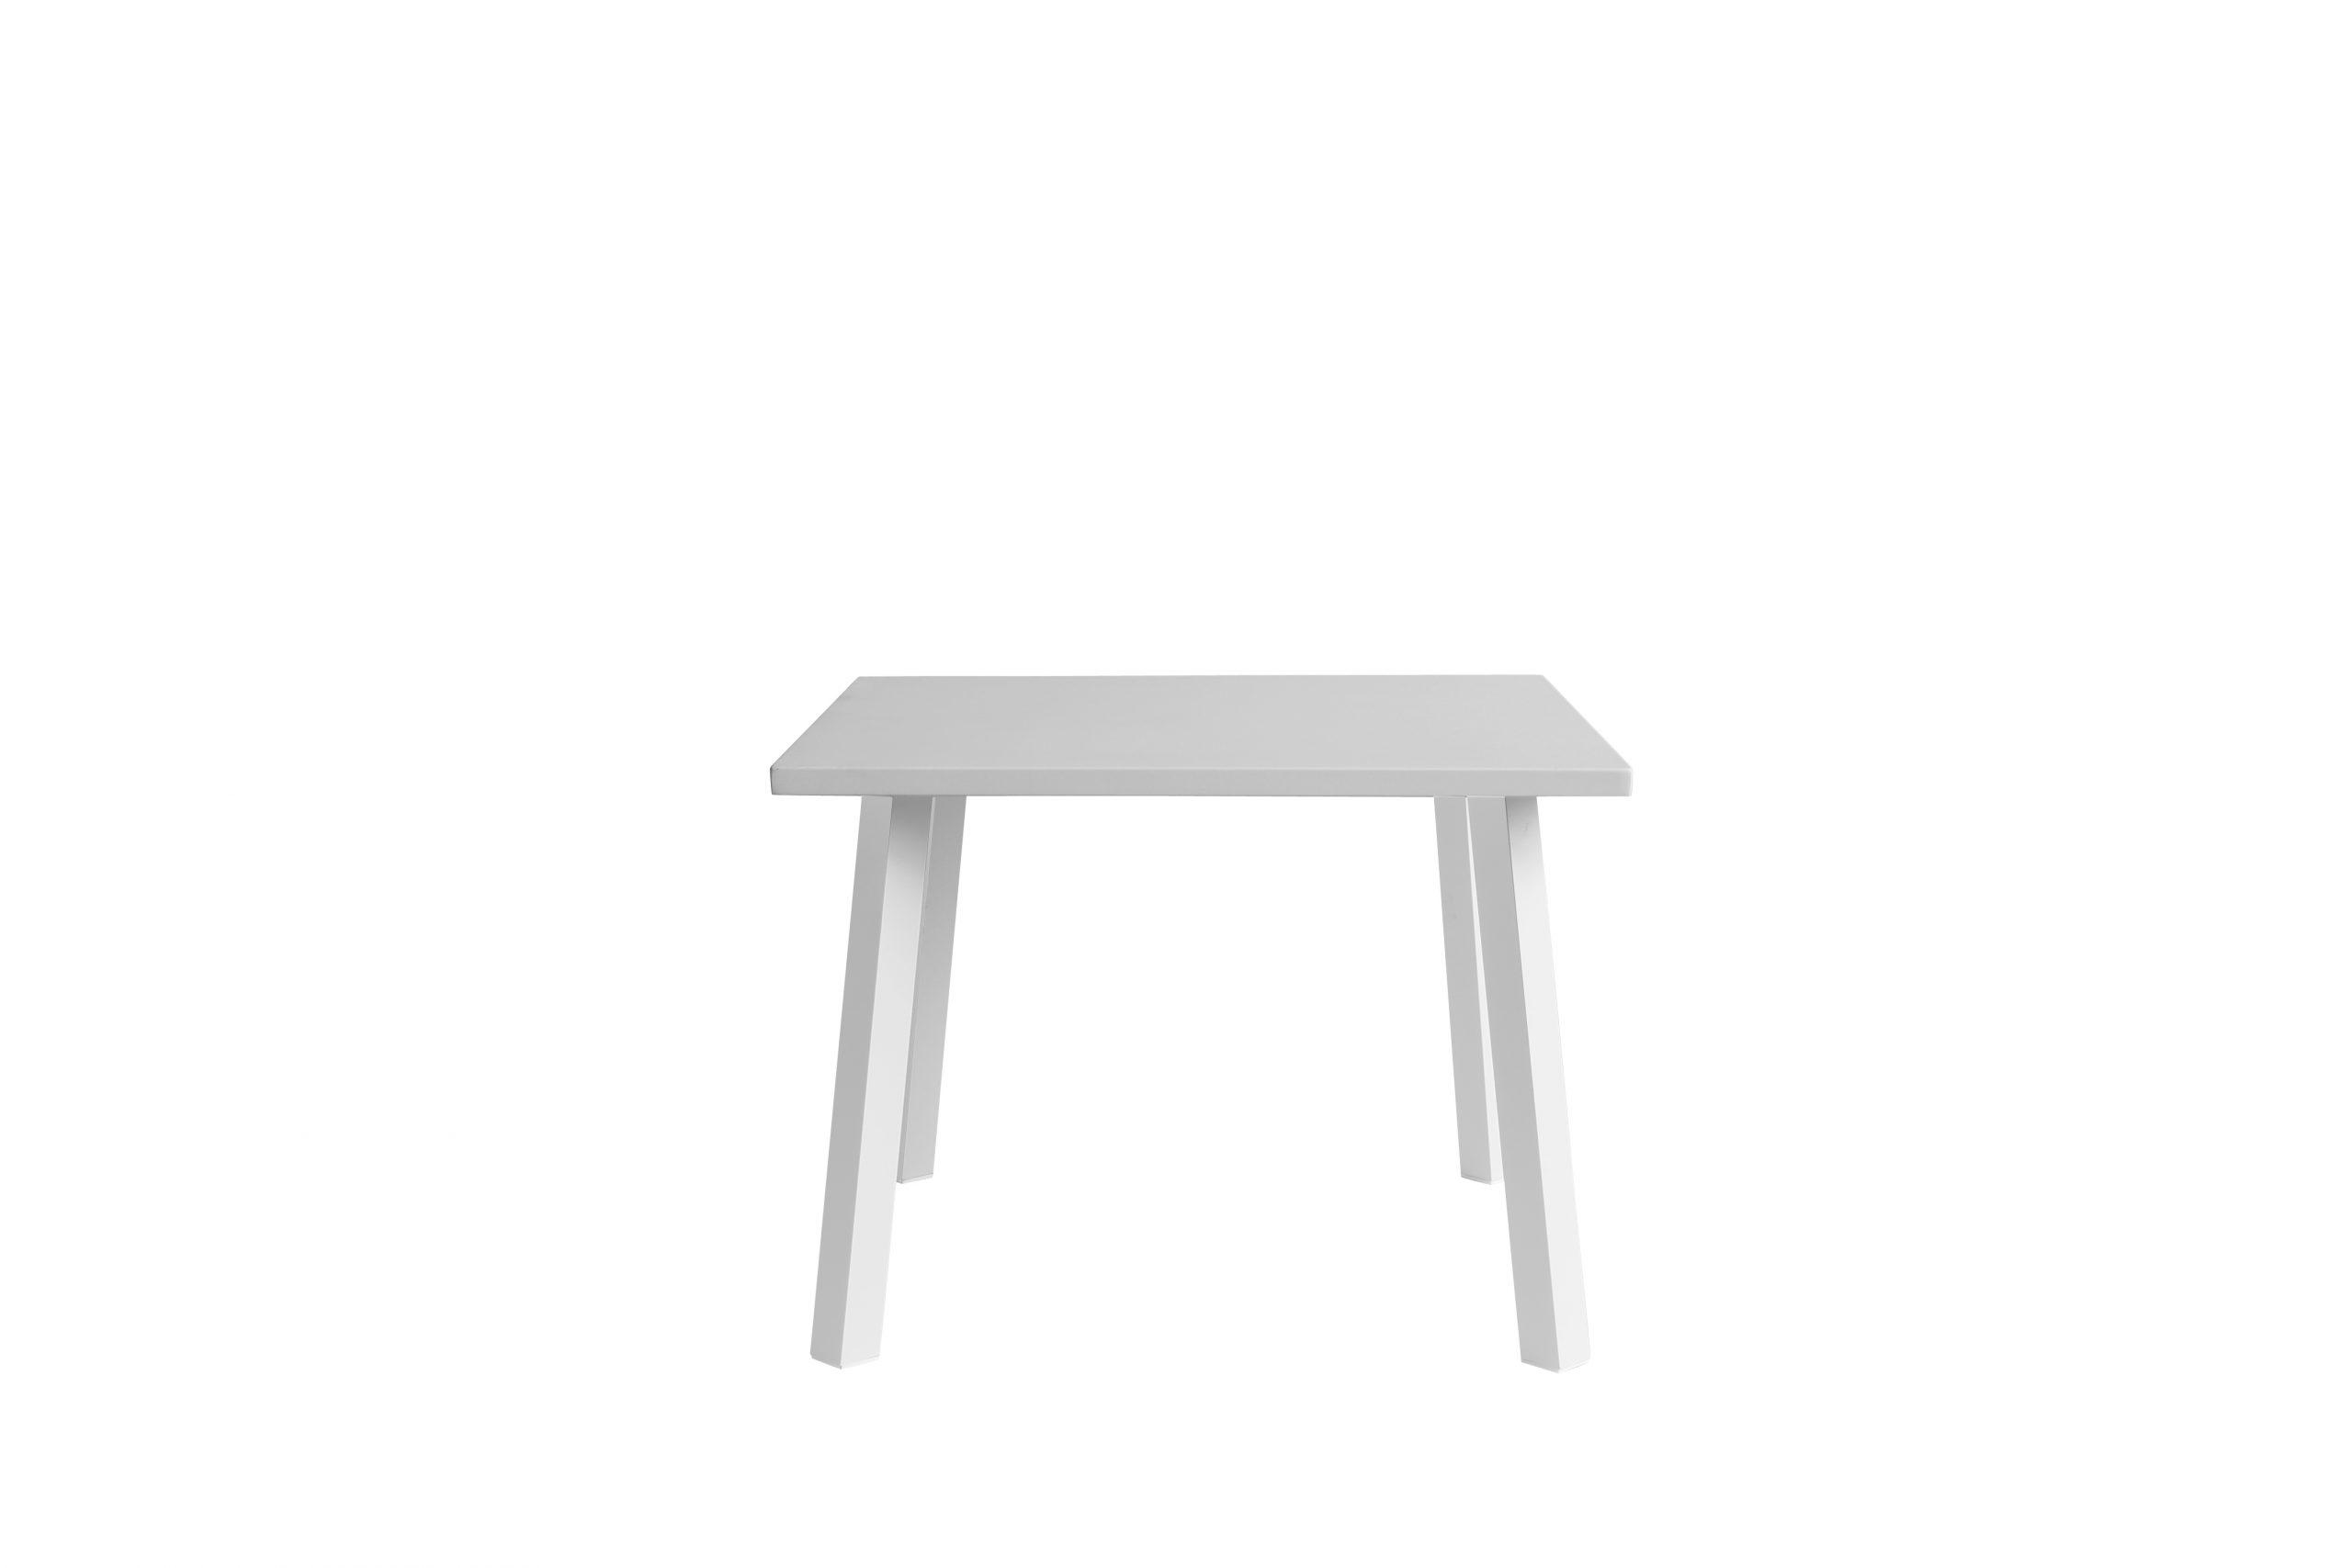 Contemporary Outdoor Dining Table DT1593S-WHT Rio DT1593S-WHT in White 